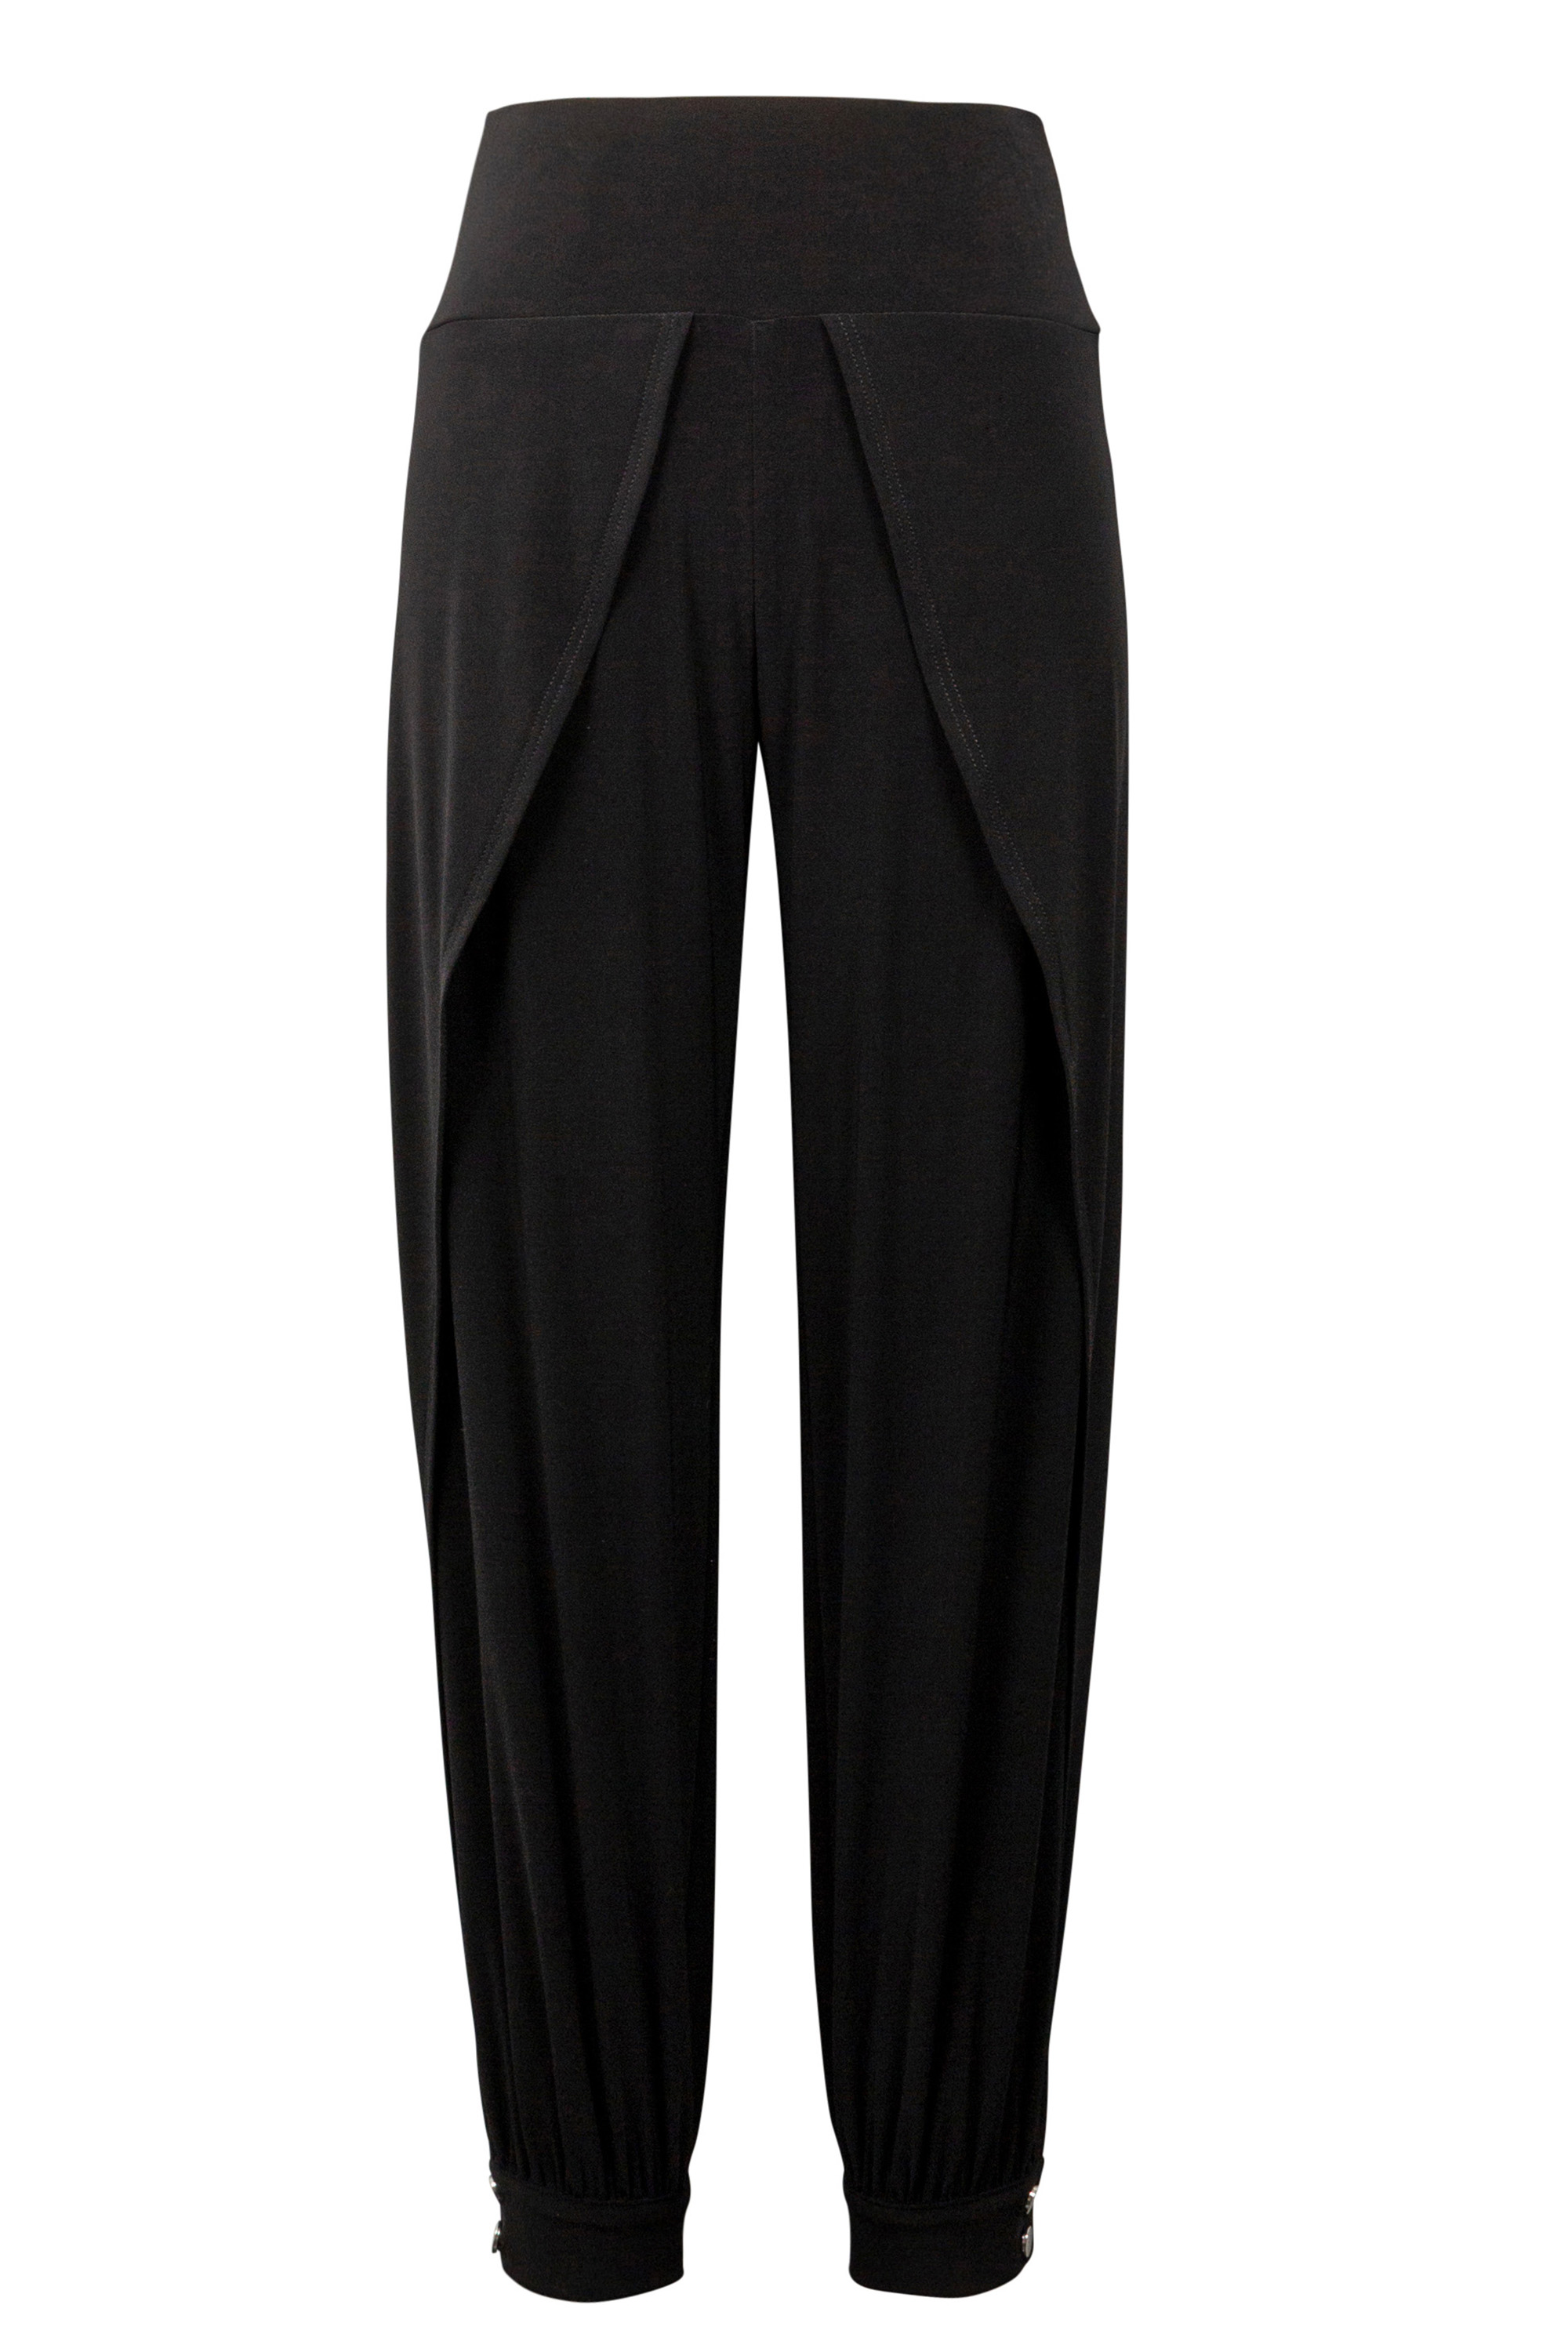 Black Cuffed Pant-Size 10 only